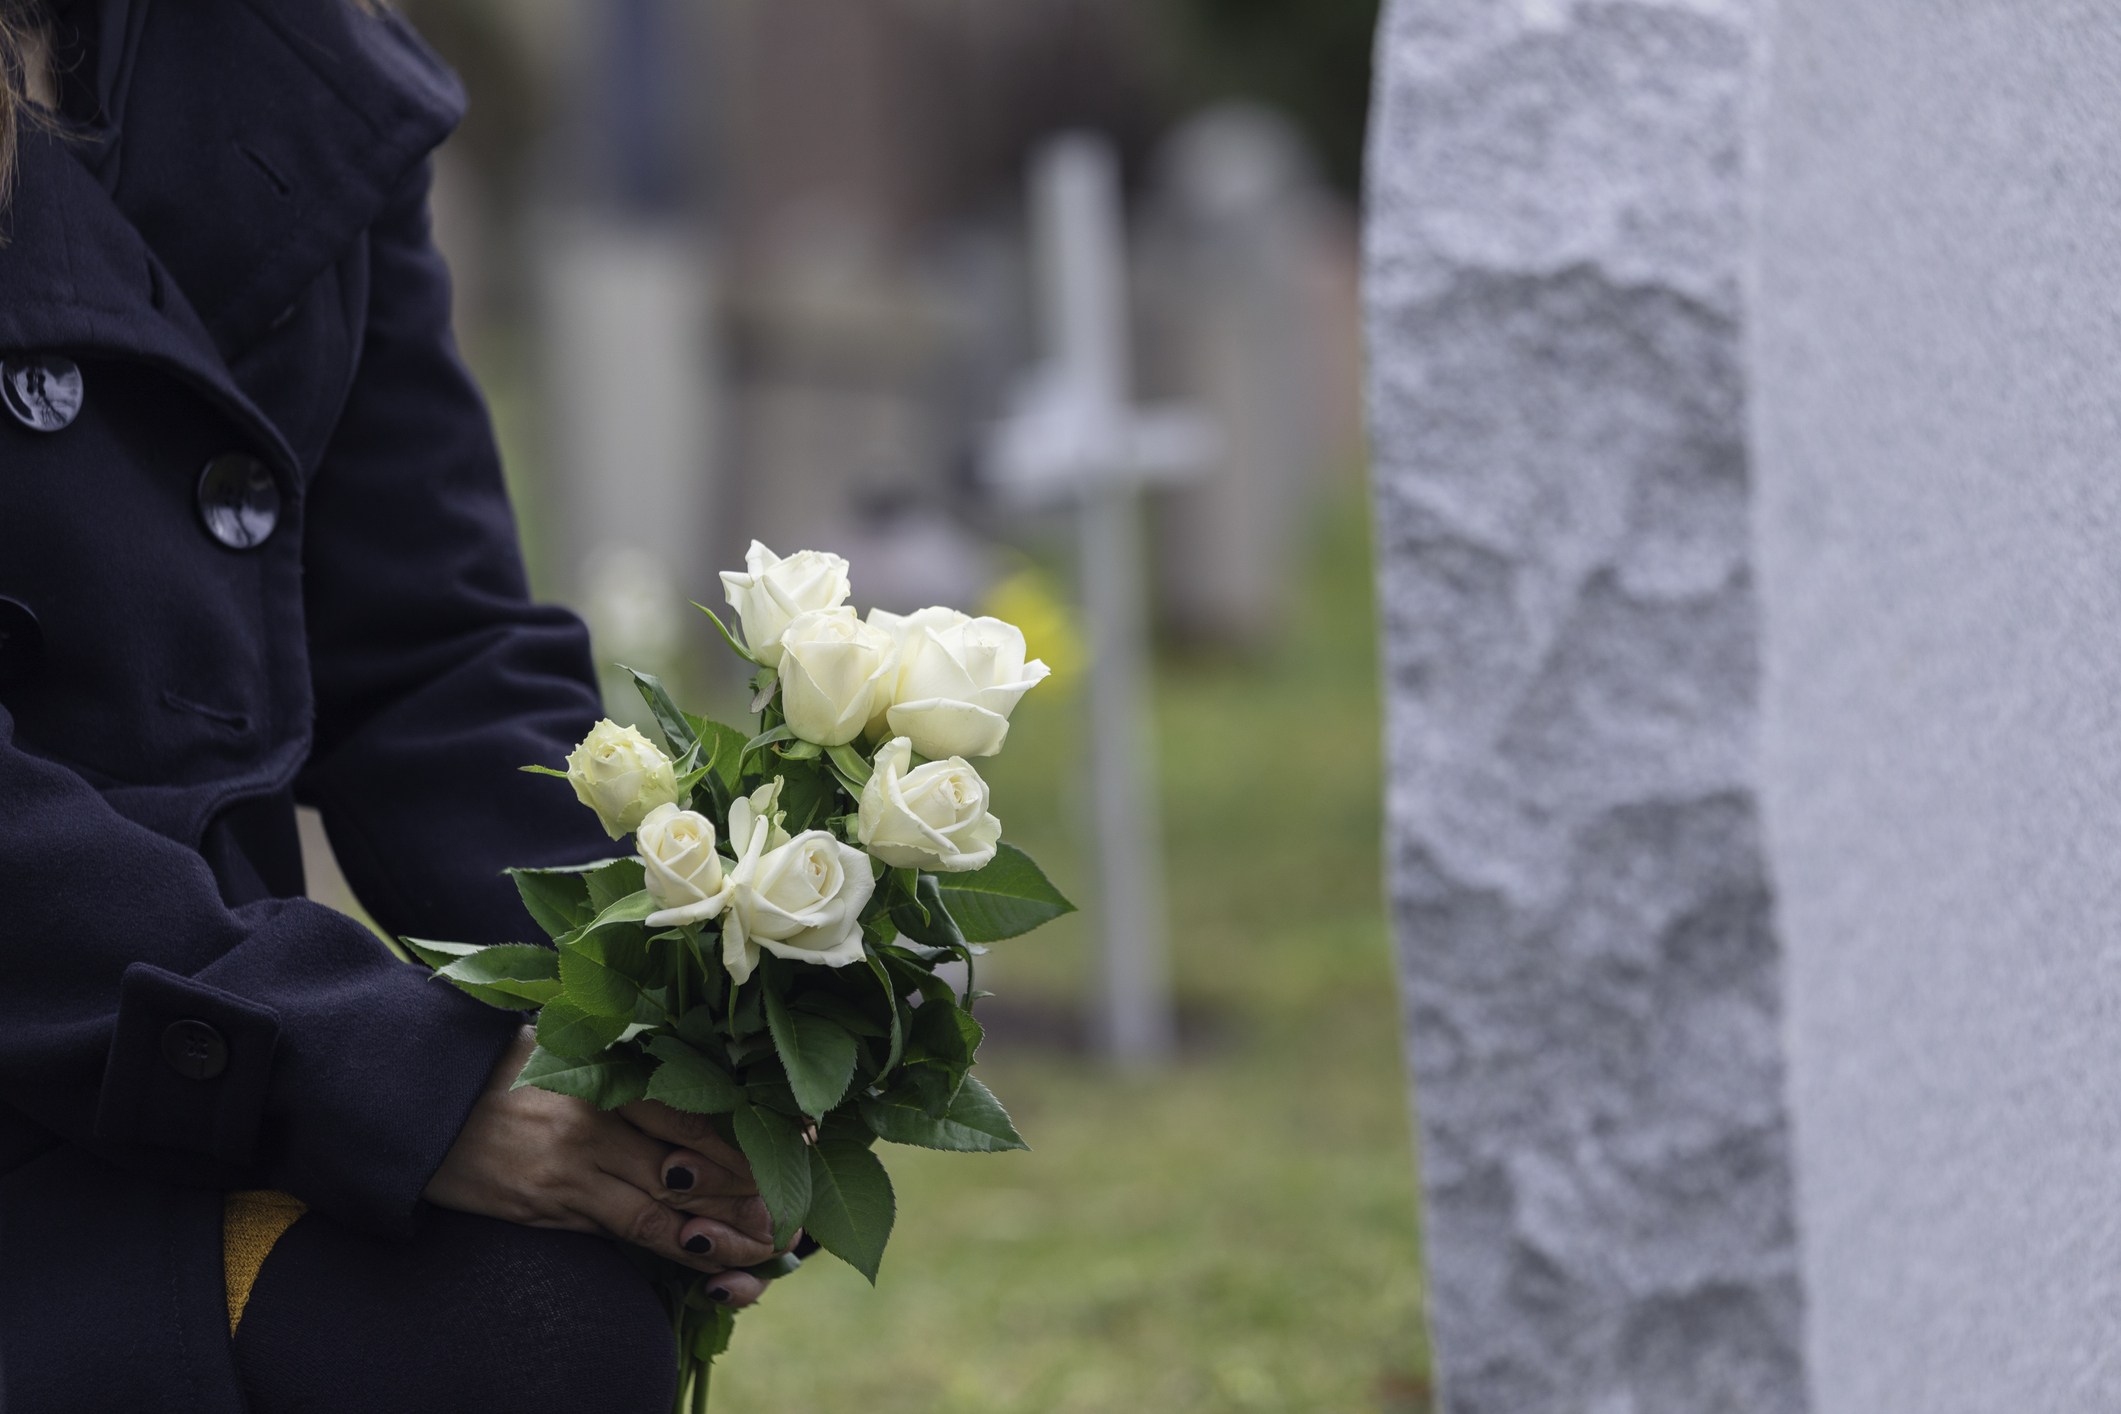 Woman leaving flowers at a grave